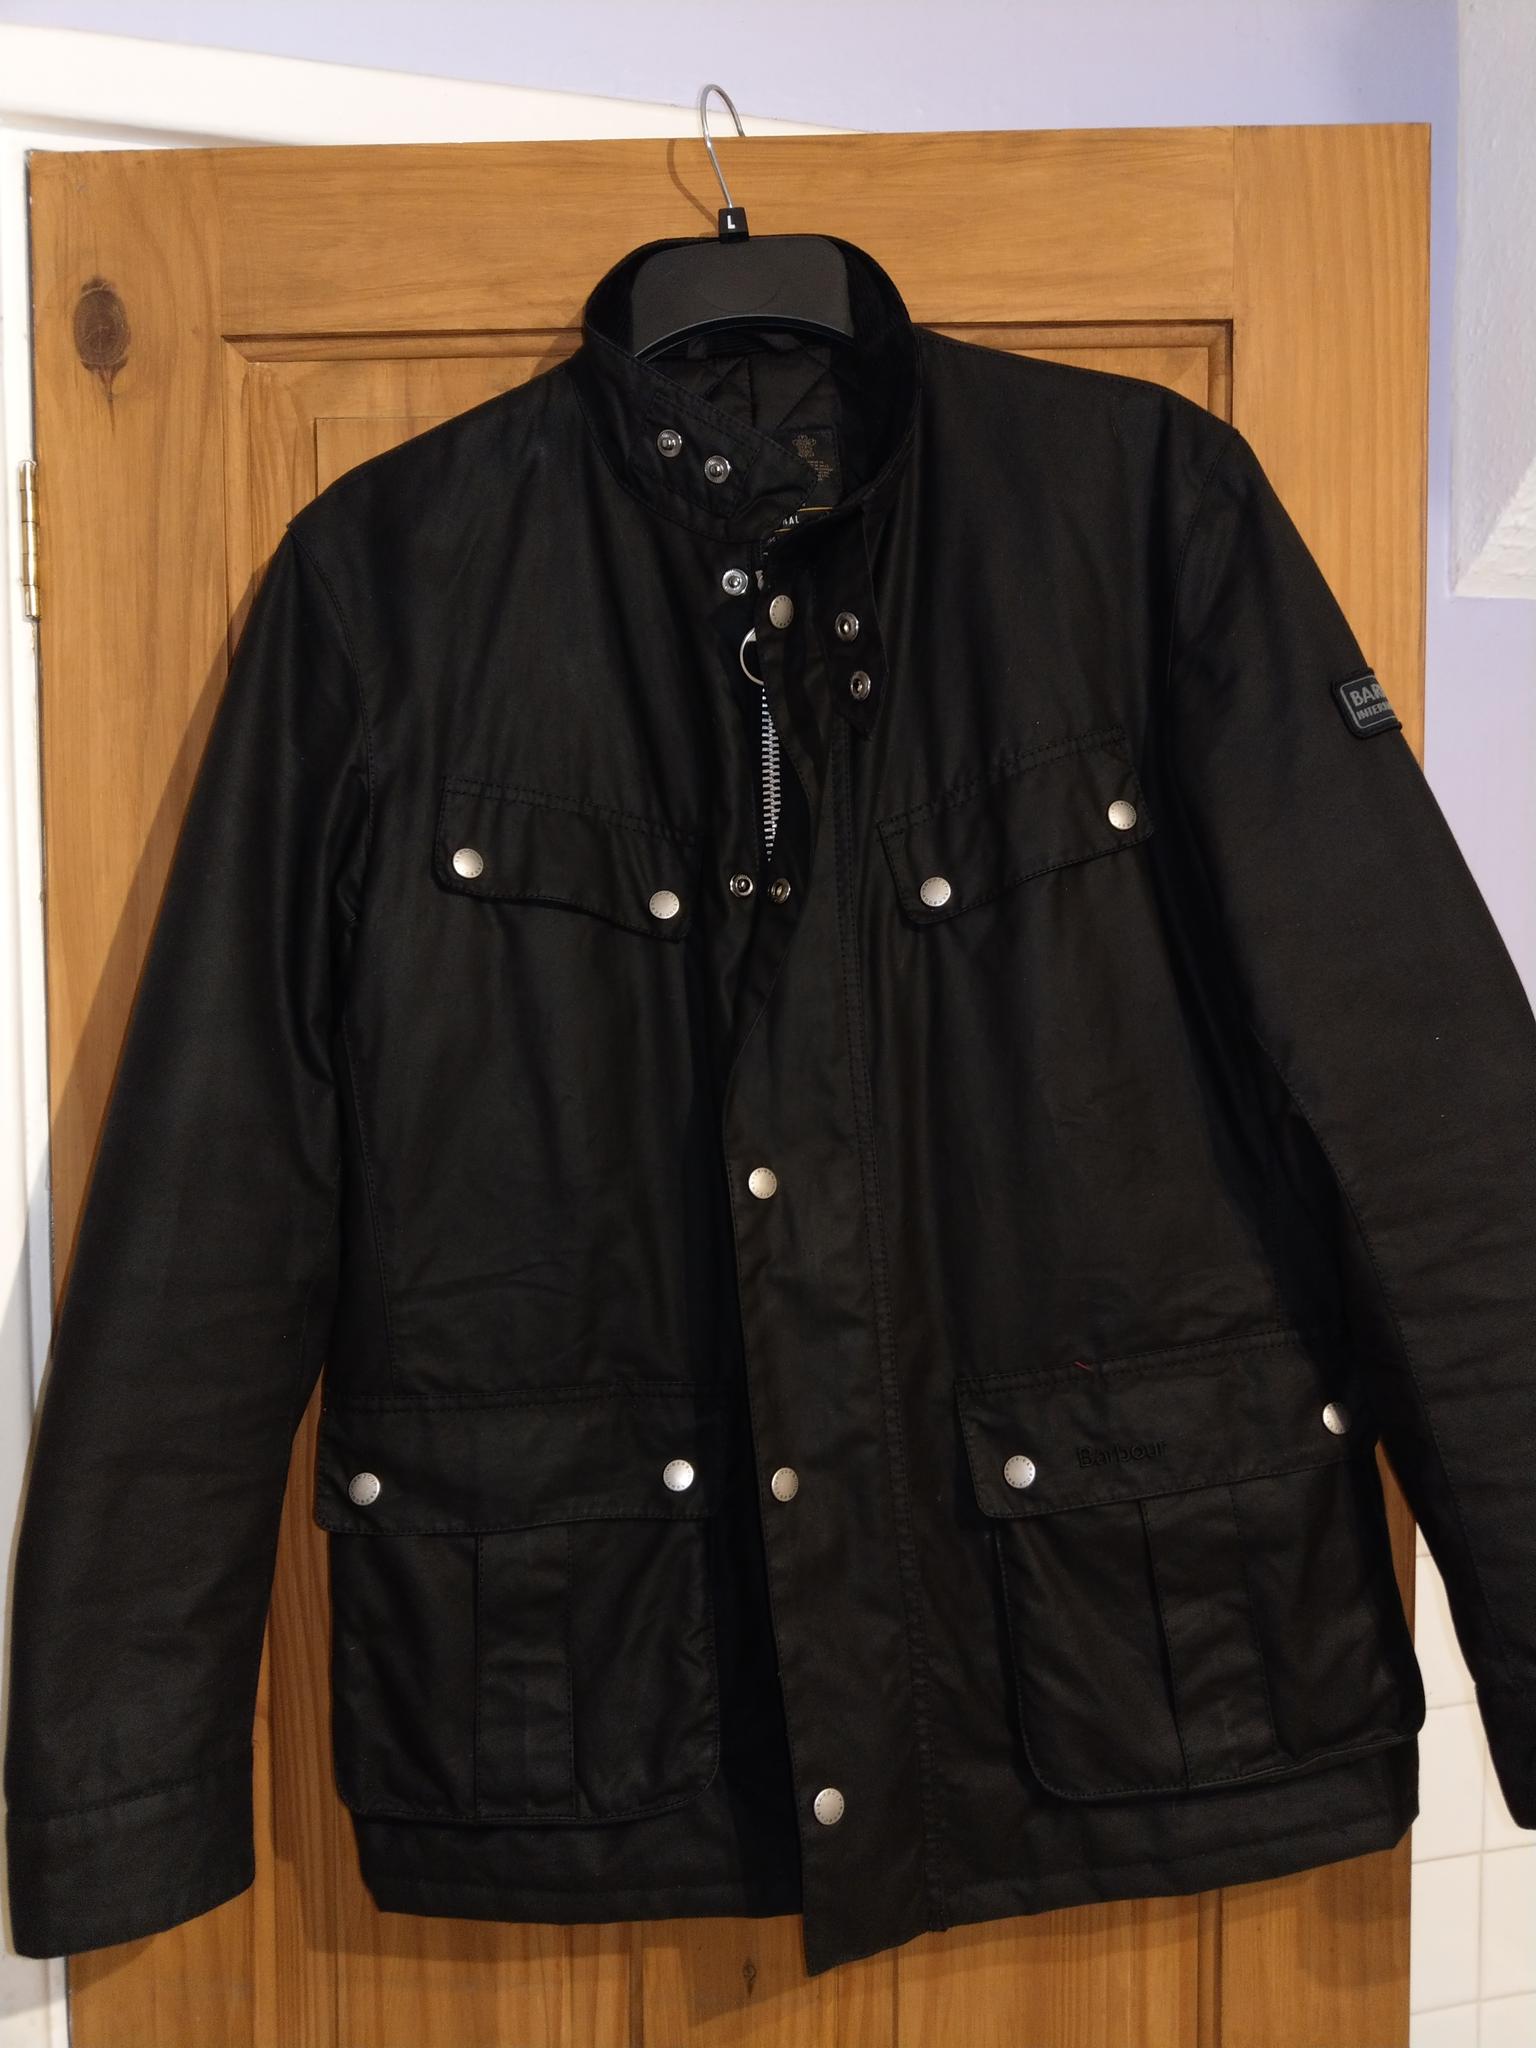 barbour wax jacket house of fraser